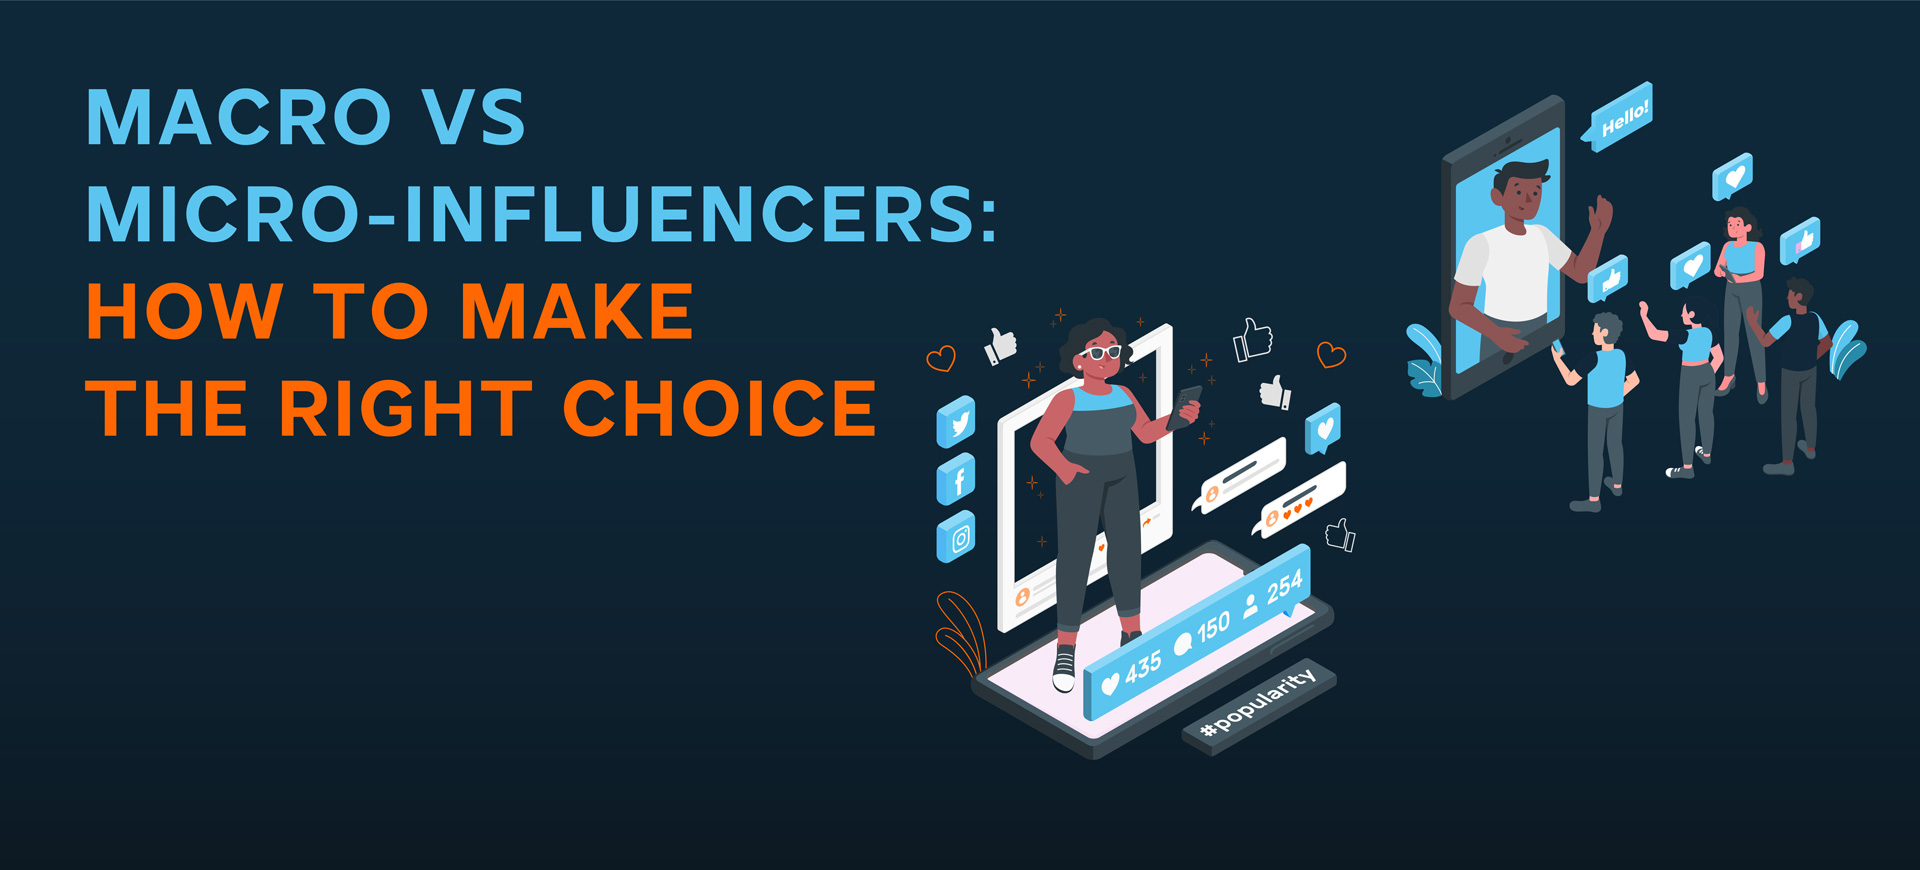 Macro Vs Micro-Influencers: How To Make The Right Choice